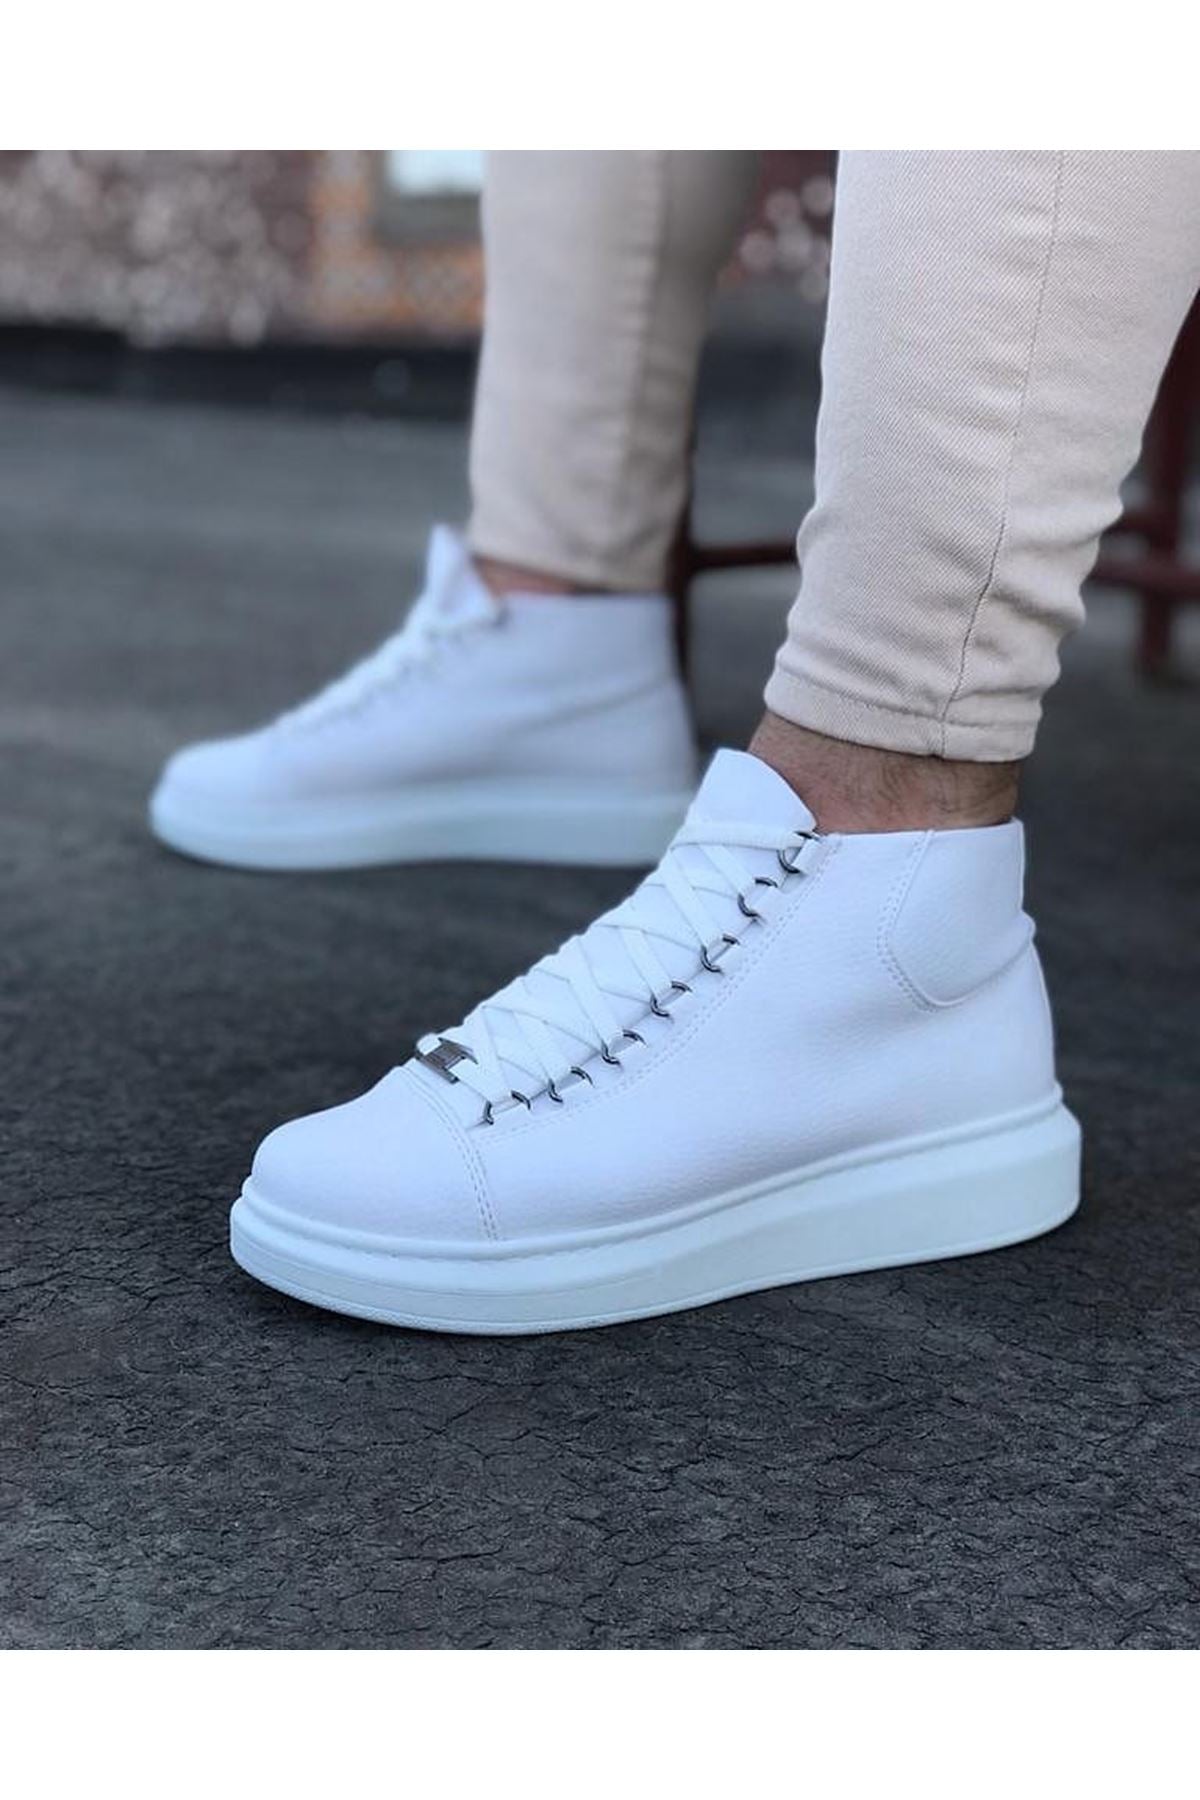 WG032 White Lace-up Sneakers Half Ankle Boots - STREETMODE™